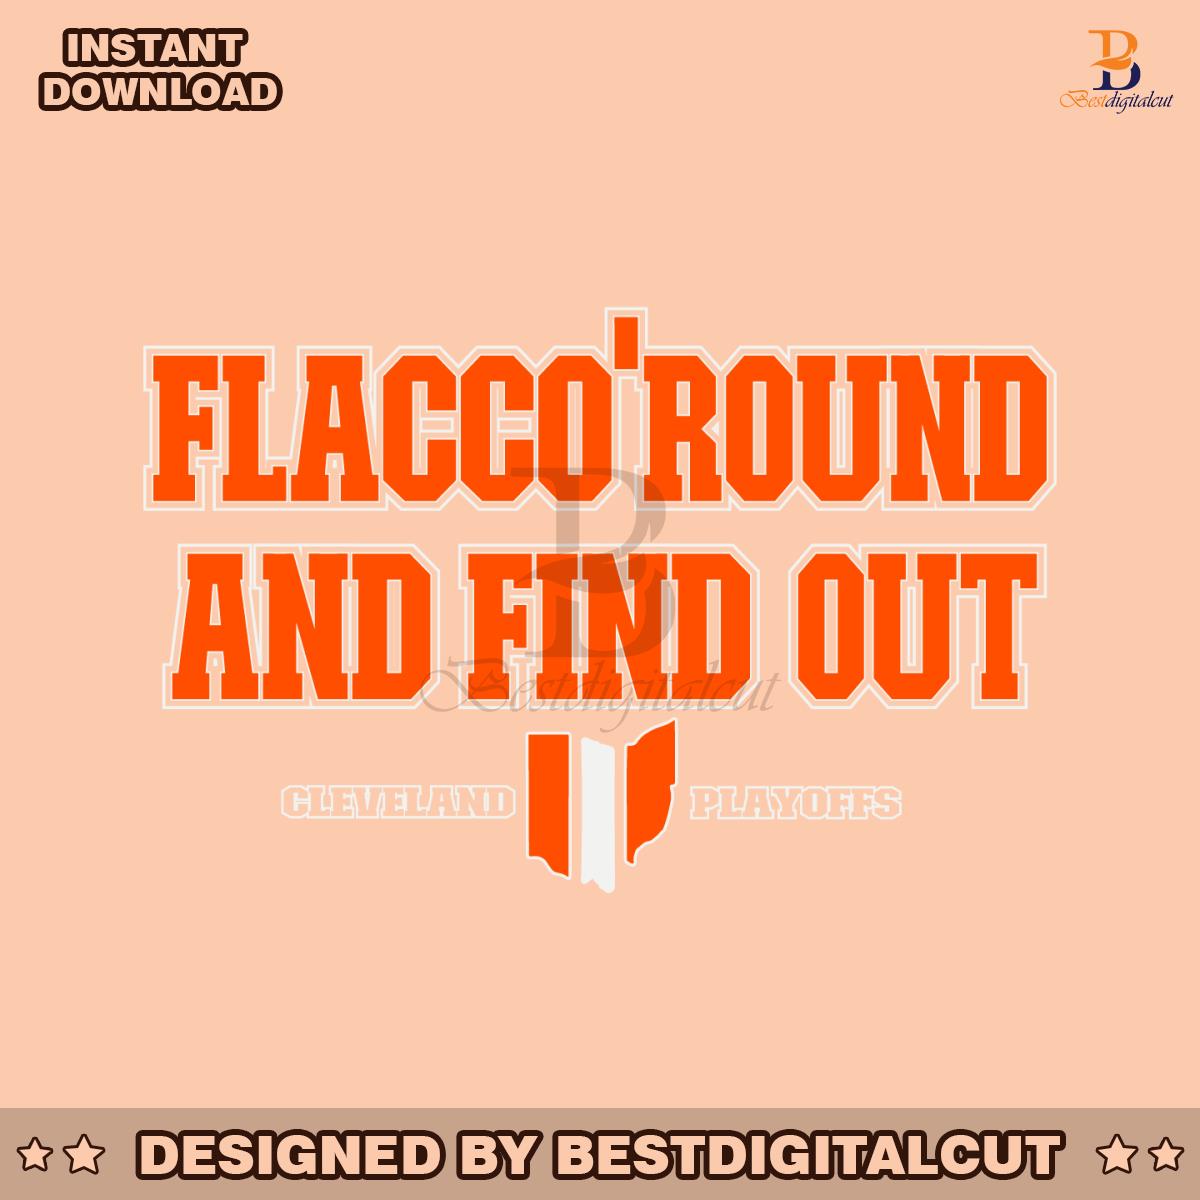 flacco-round-and-find-out-cleveland-playoffs-svg